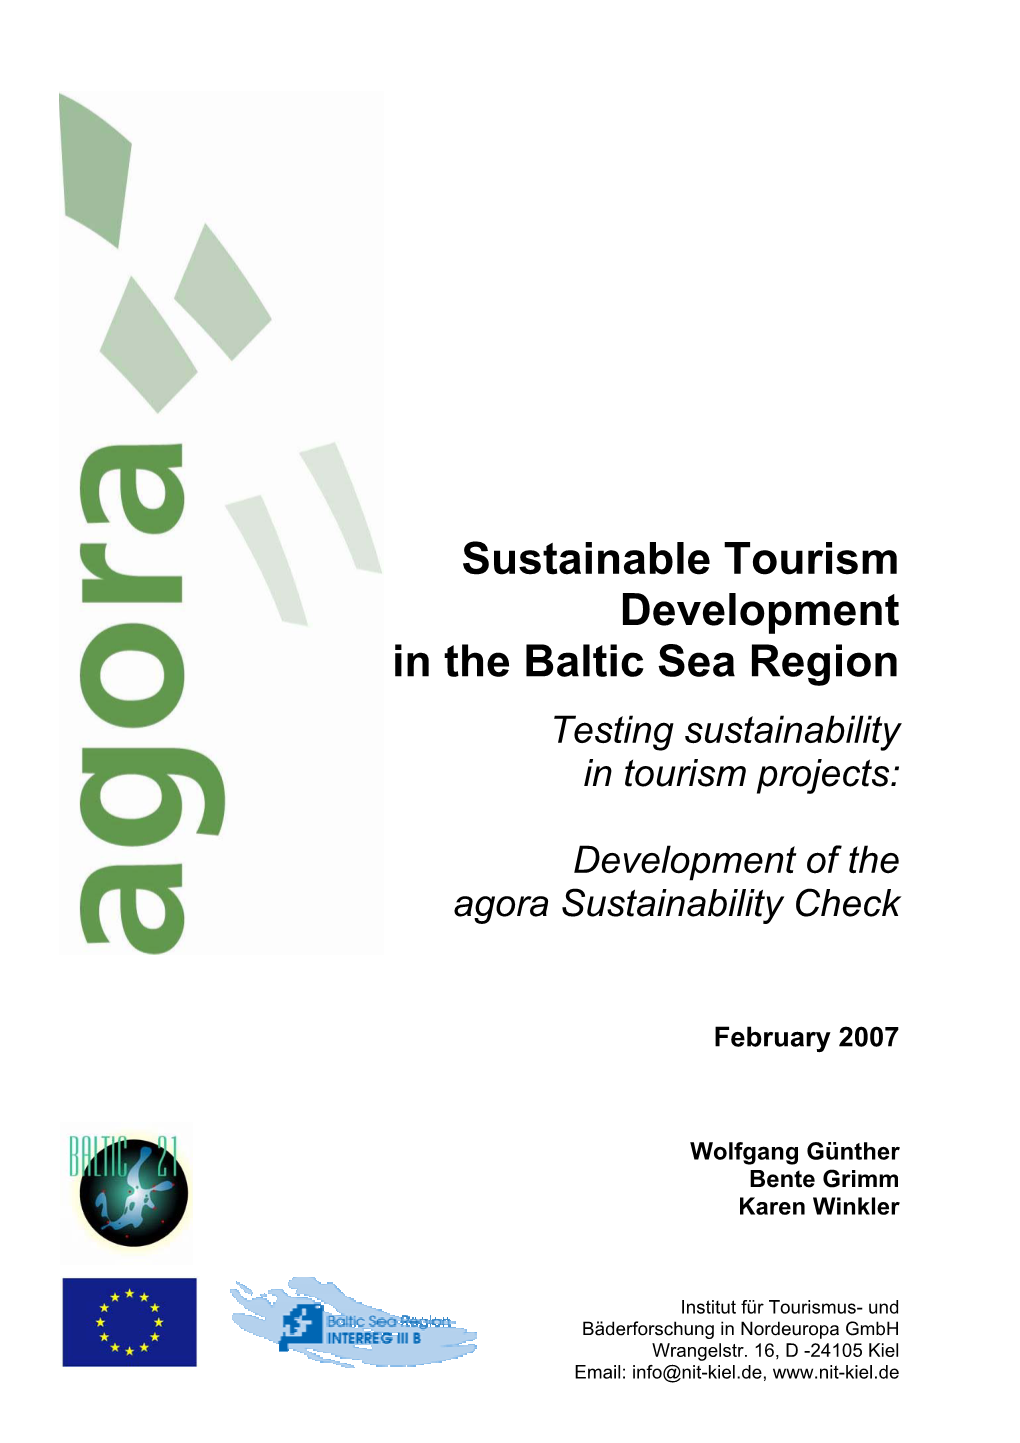 Sustainable Tourism Development in the Baltic Sea Region